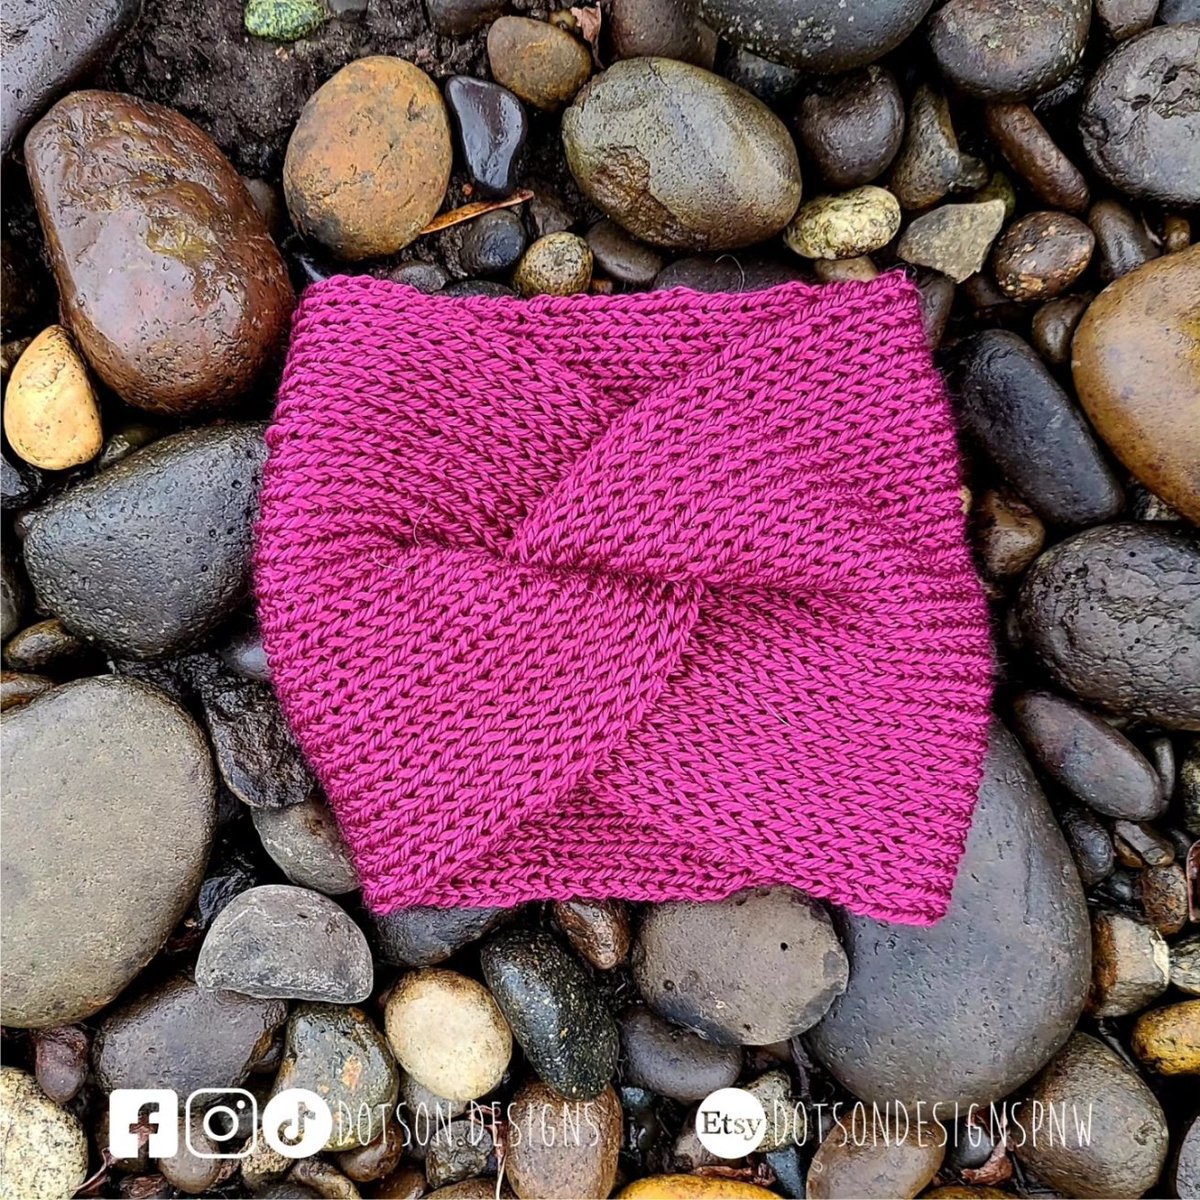 Hey look, I made something that WASNT a stuffie. Lol 

Had a lot of fun making this beanie and ear warmers ❤️ 

Beanie and ear warmer pattern by YarnStash on YouTube 

#art #craft #yarn #crochet #crochetersofinstagram #crochetingaddict #crochetaddict #freecrochetpattern